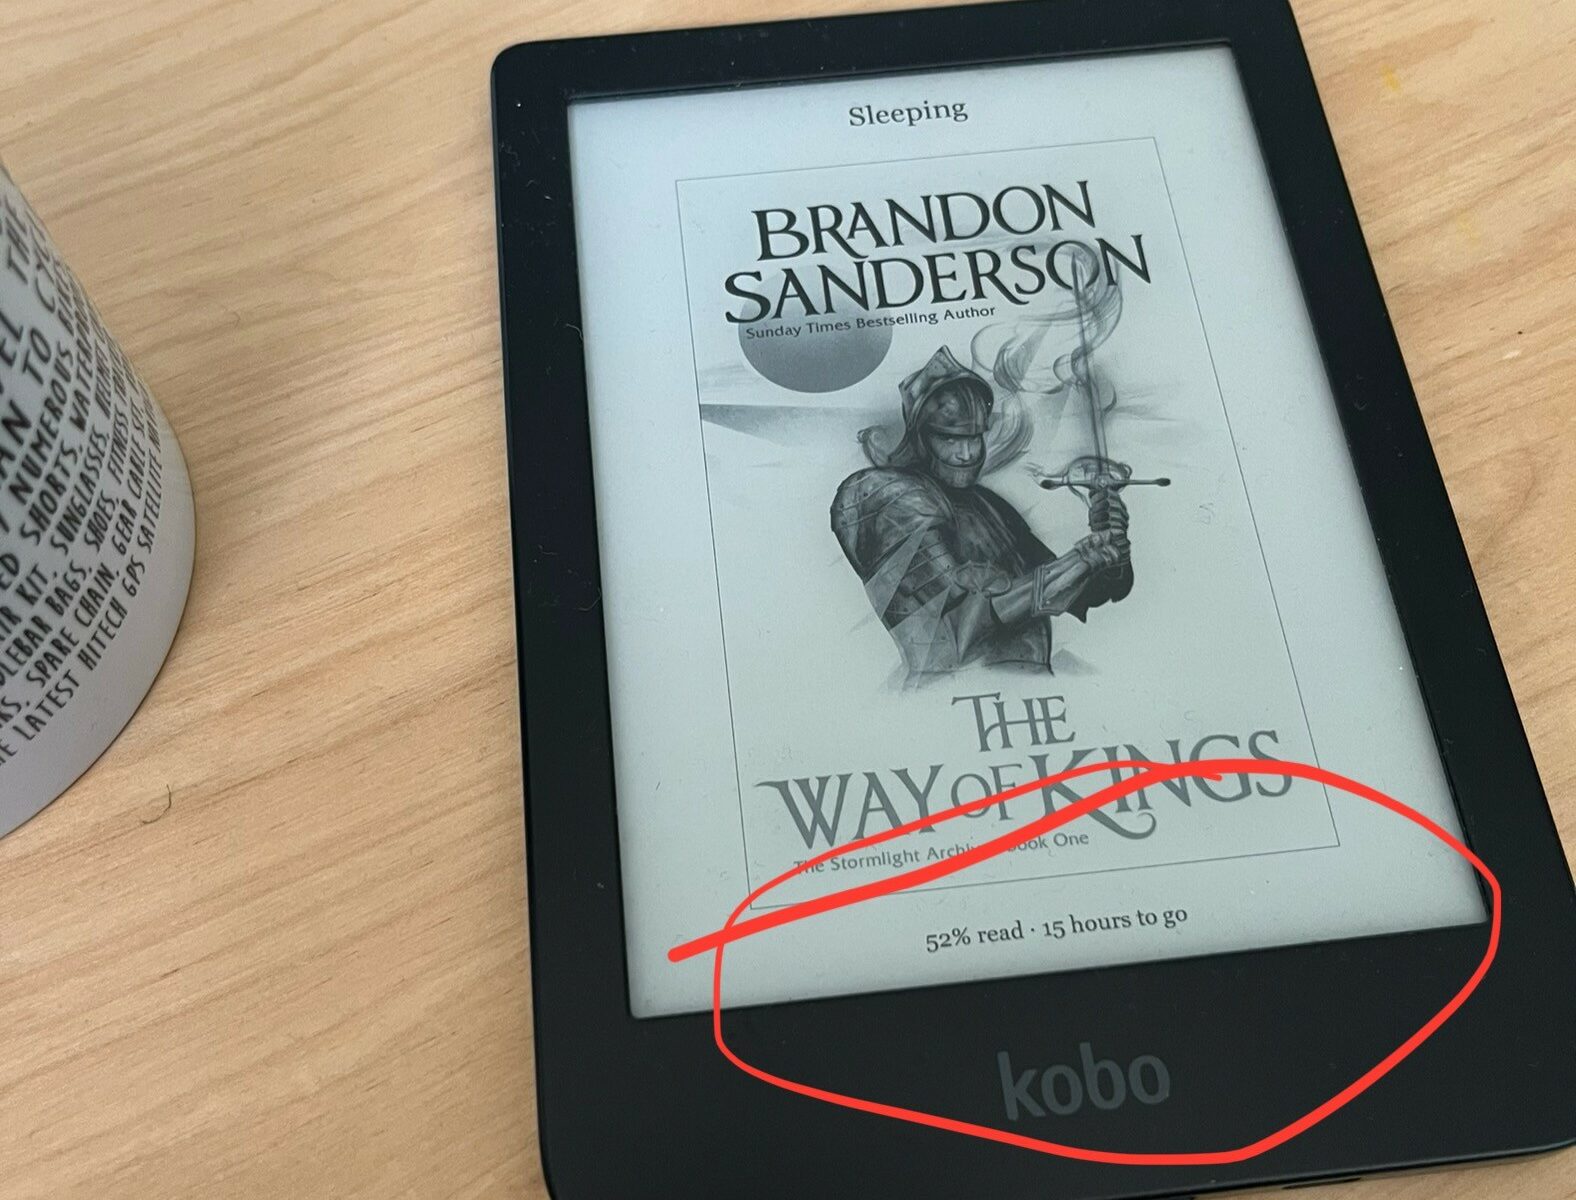 My Kobo eReader sits on a table. The cover screen shows Brandon Sanderson’s The Way of Kings. I have proudly highlighted that it says I’m 52% read.